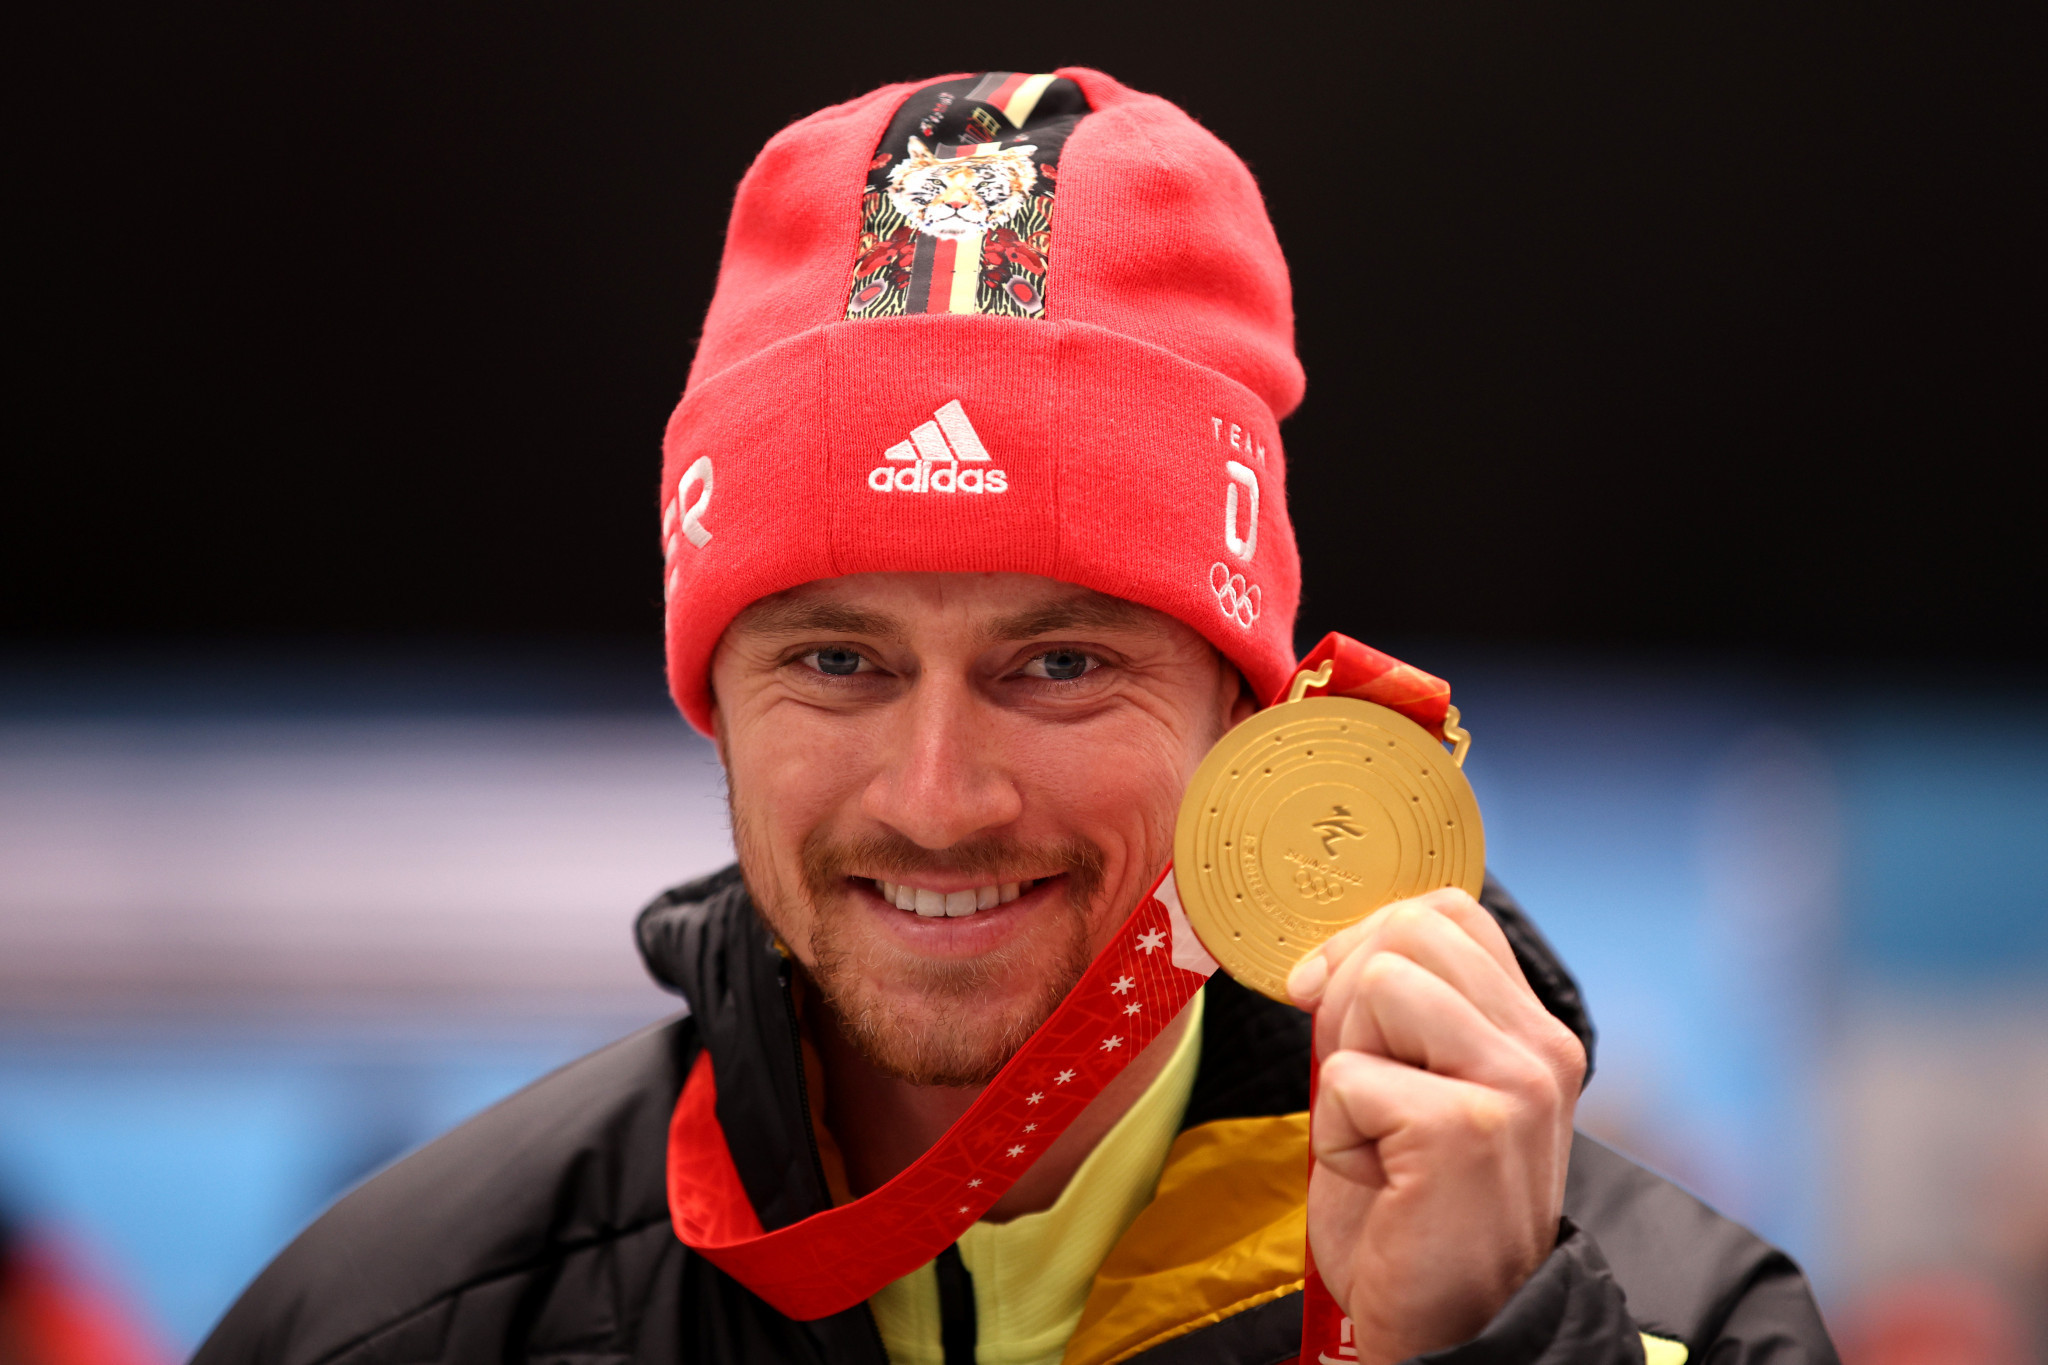 Germany's Johannes Ludwig has announced his retirement at the age of 36 having won two Olympic luge gold medals at Beijing 2022 ©Getty Images